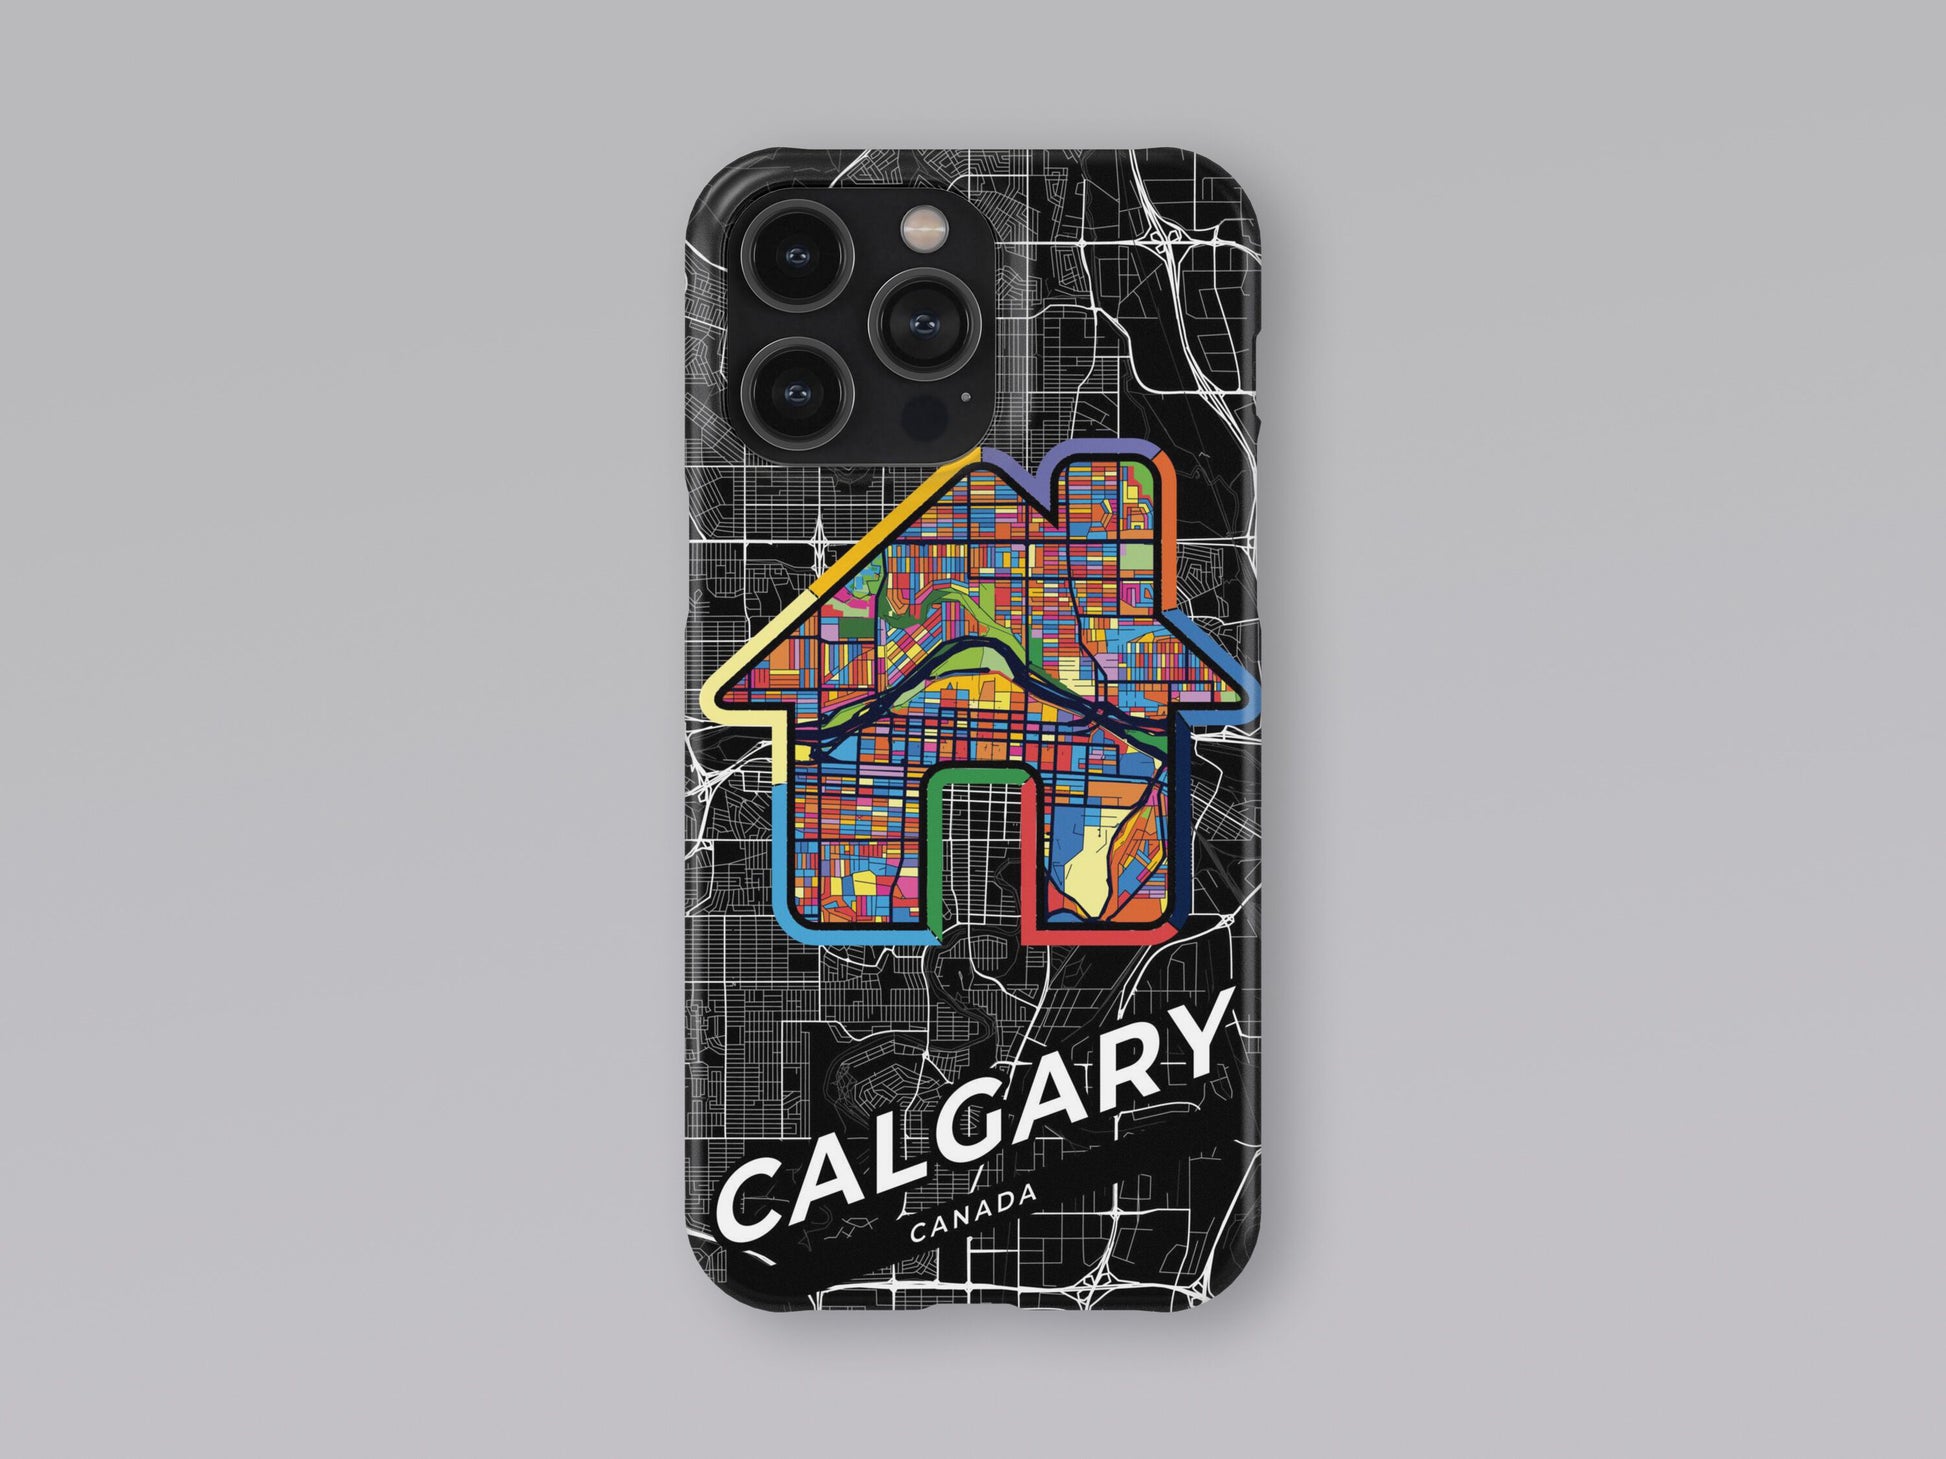 Calgary Canada slim phone case with colorful icon. Birthday, wedding or housewarming gift. Couple match cases. 3